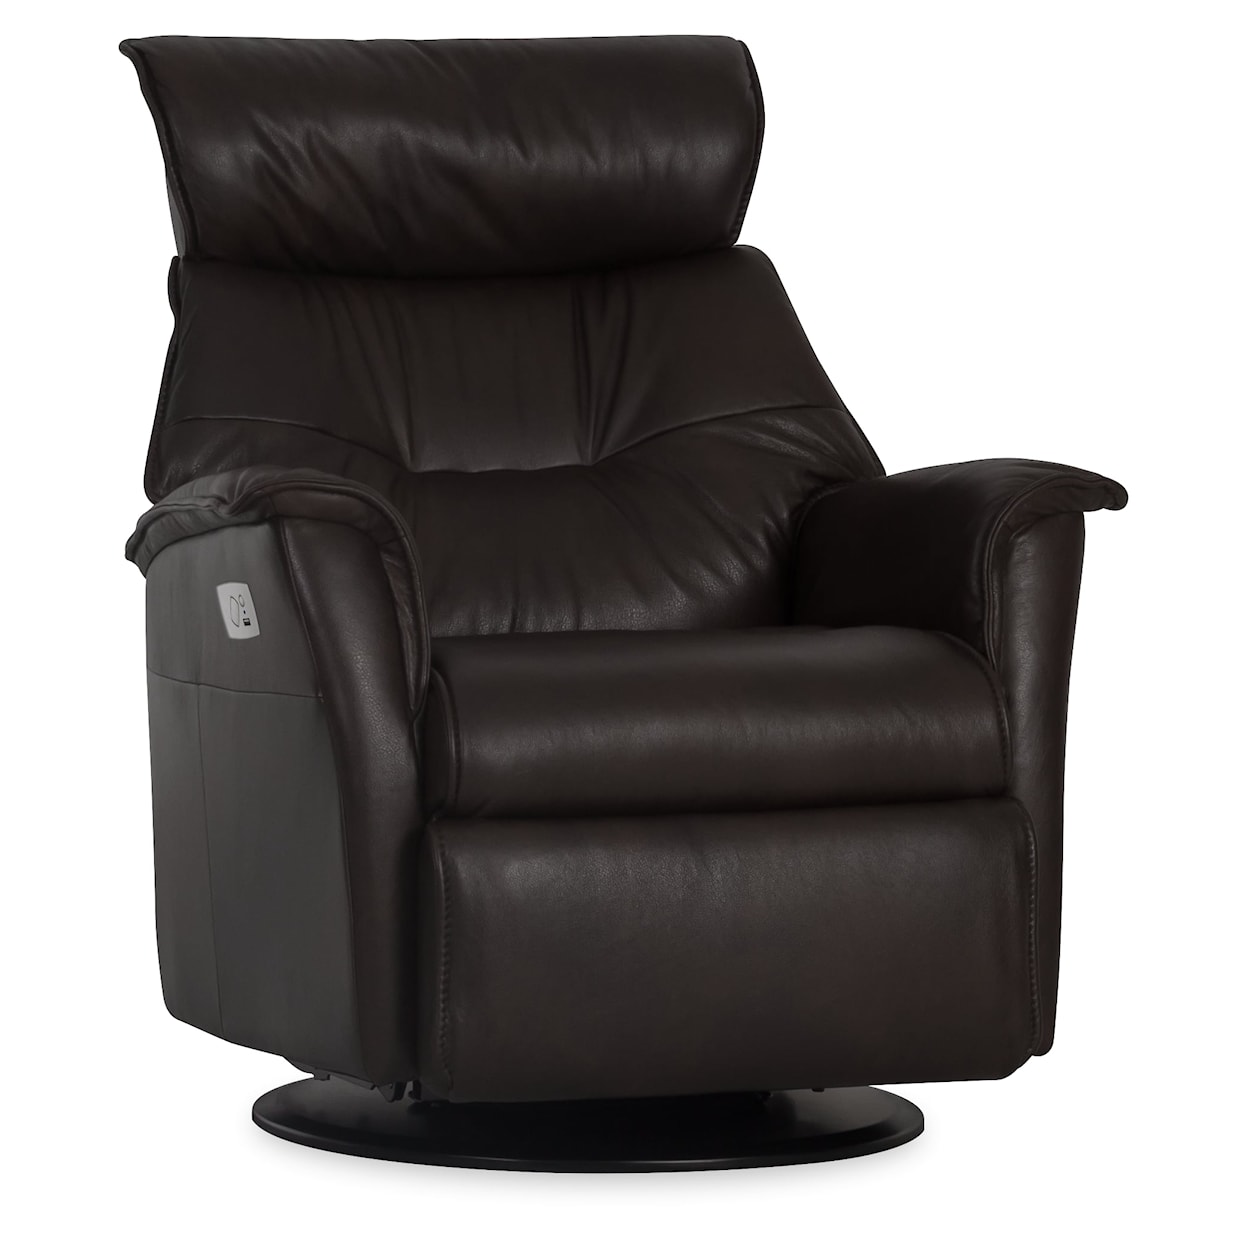 IMG Norway Captain Large Recliner